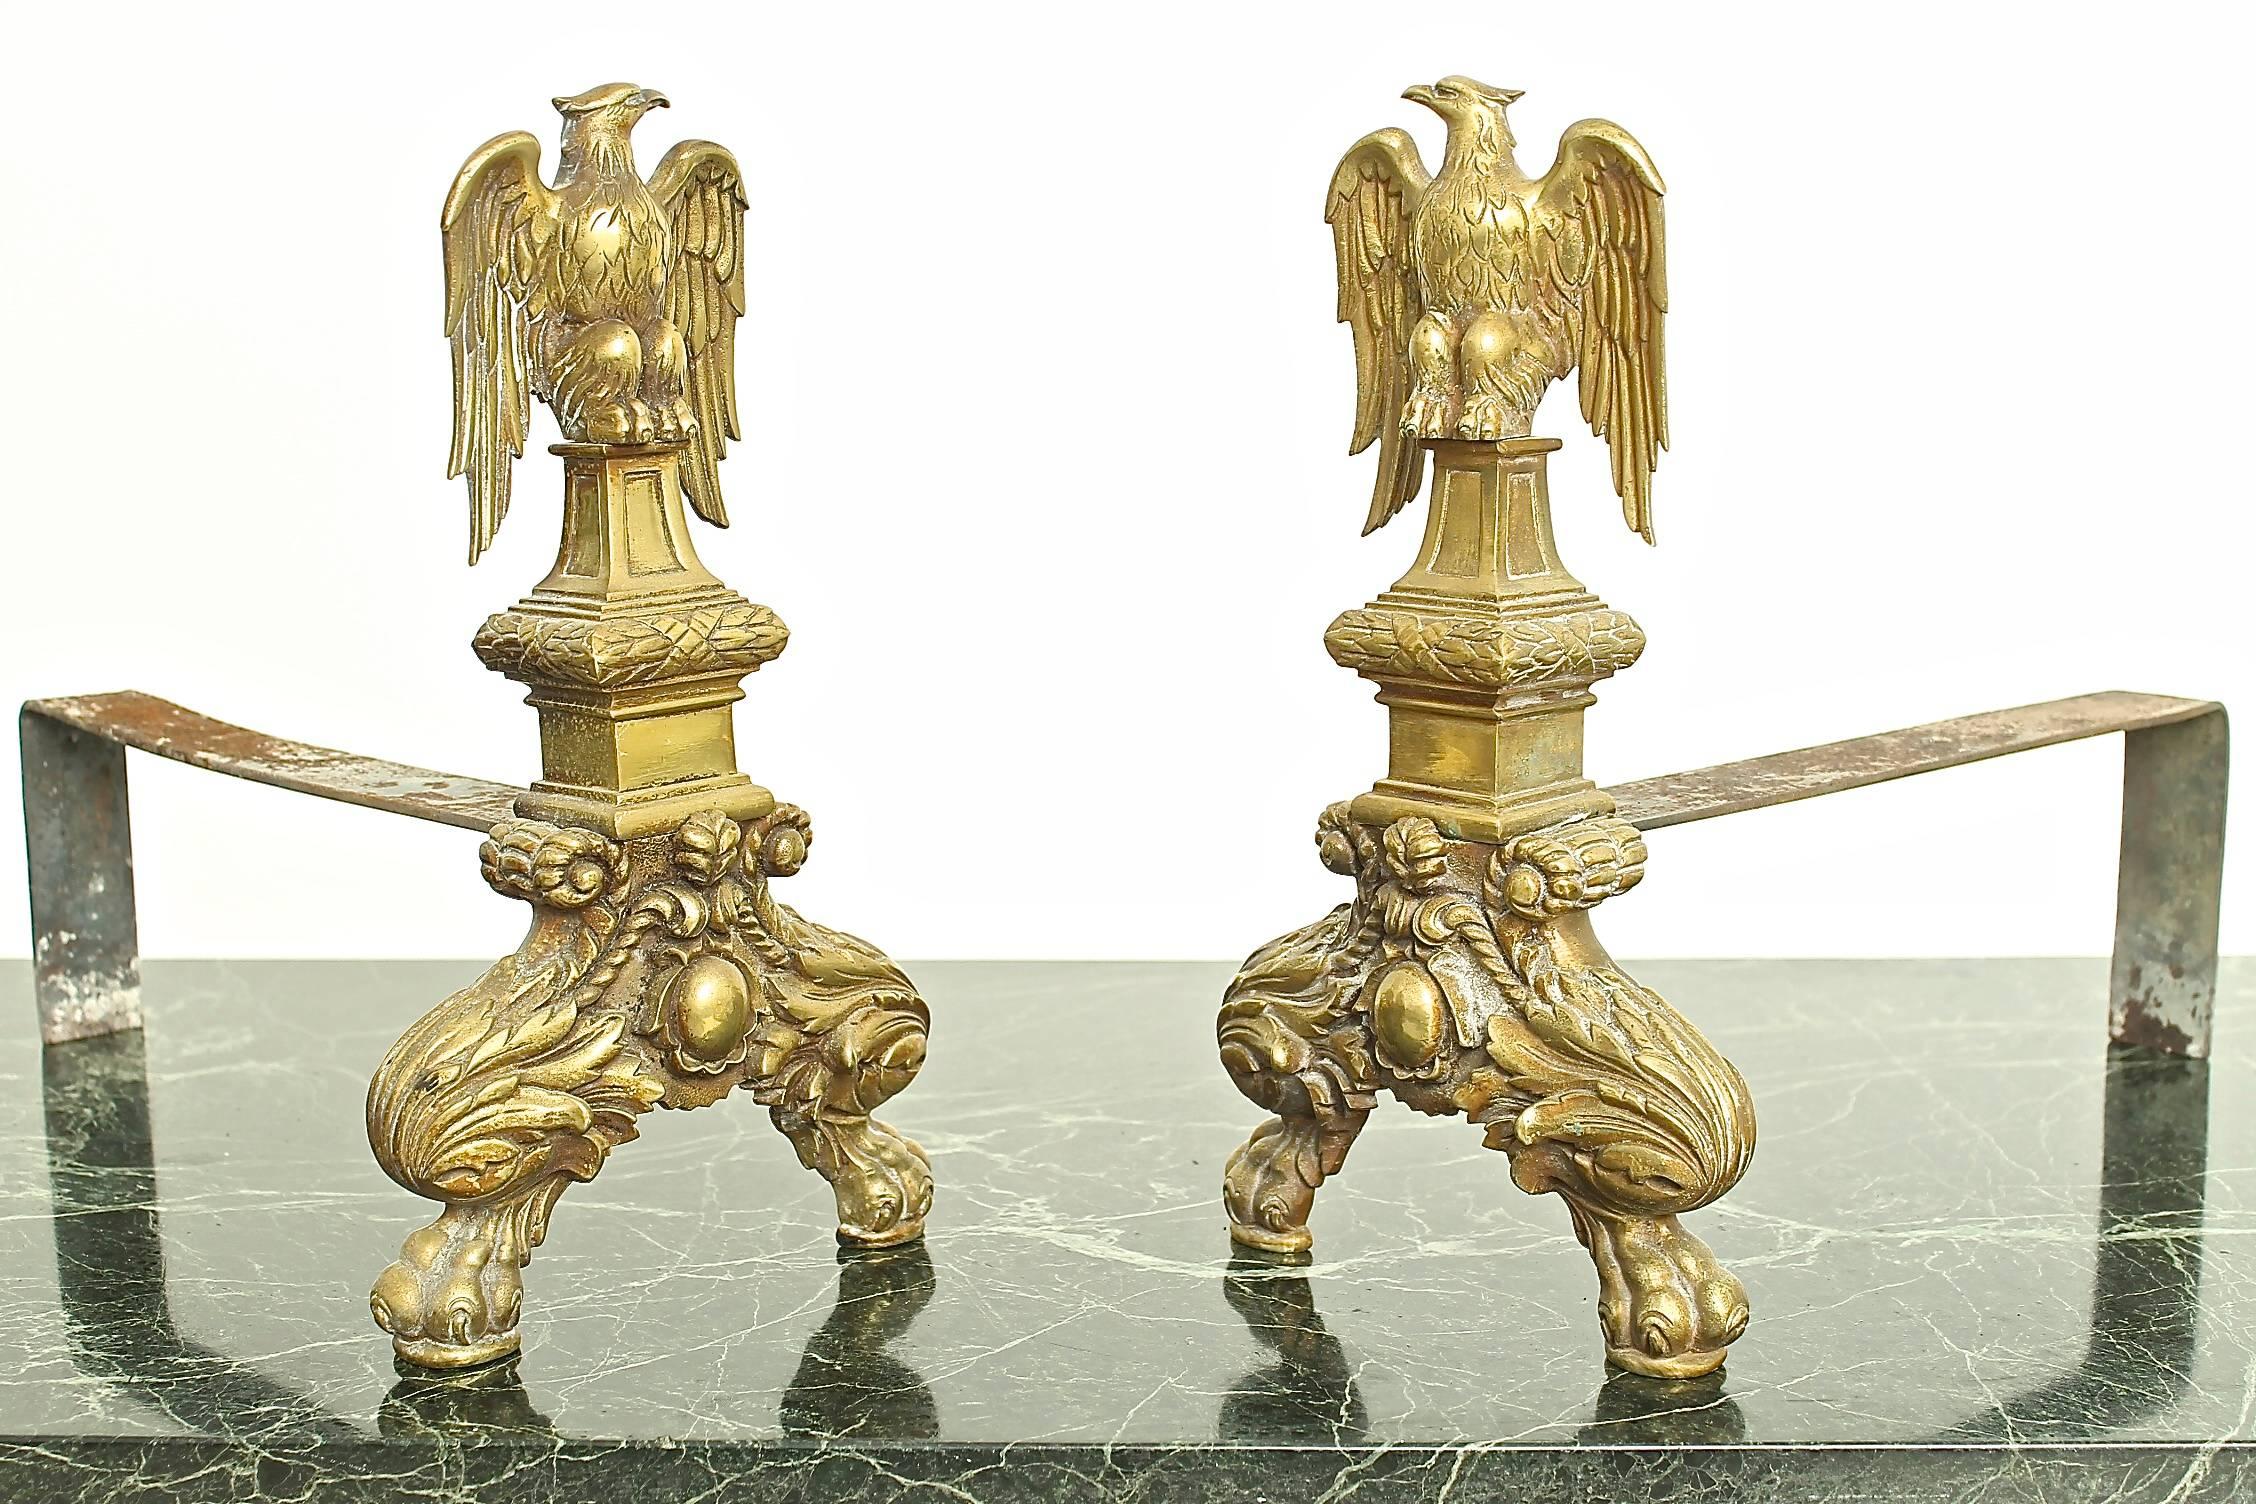 Set of two fireplace andirons representing an eagle in copper, first quarter of 20th century.
Items can be shipped anywhere in the world.